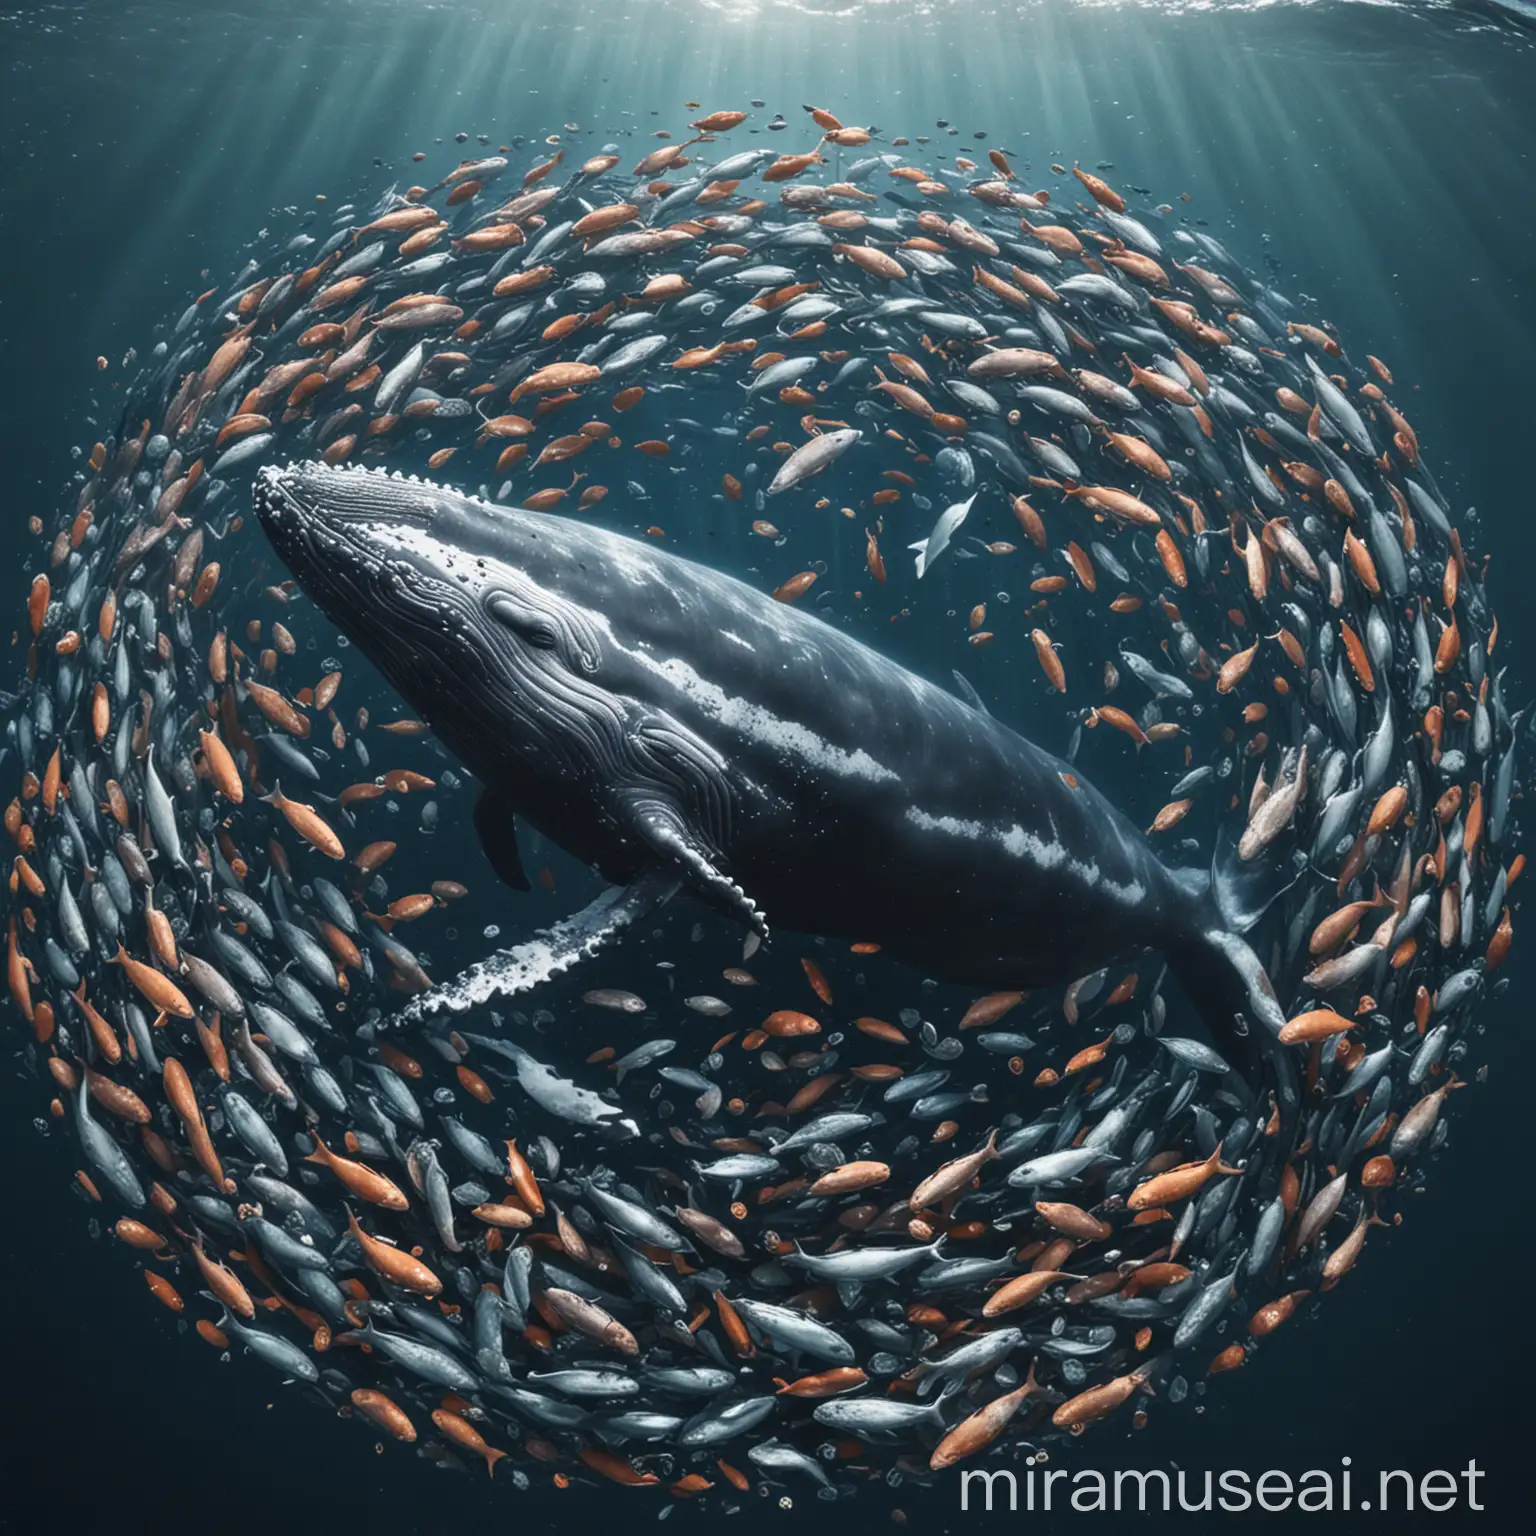 Majestic Whale Surrounded by Colorful Fish in Ocean